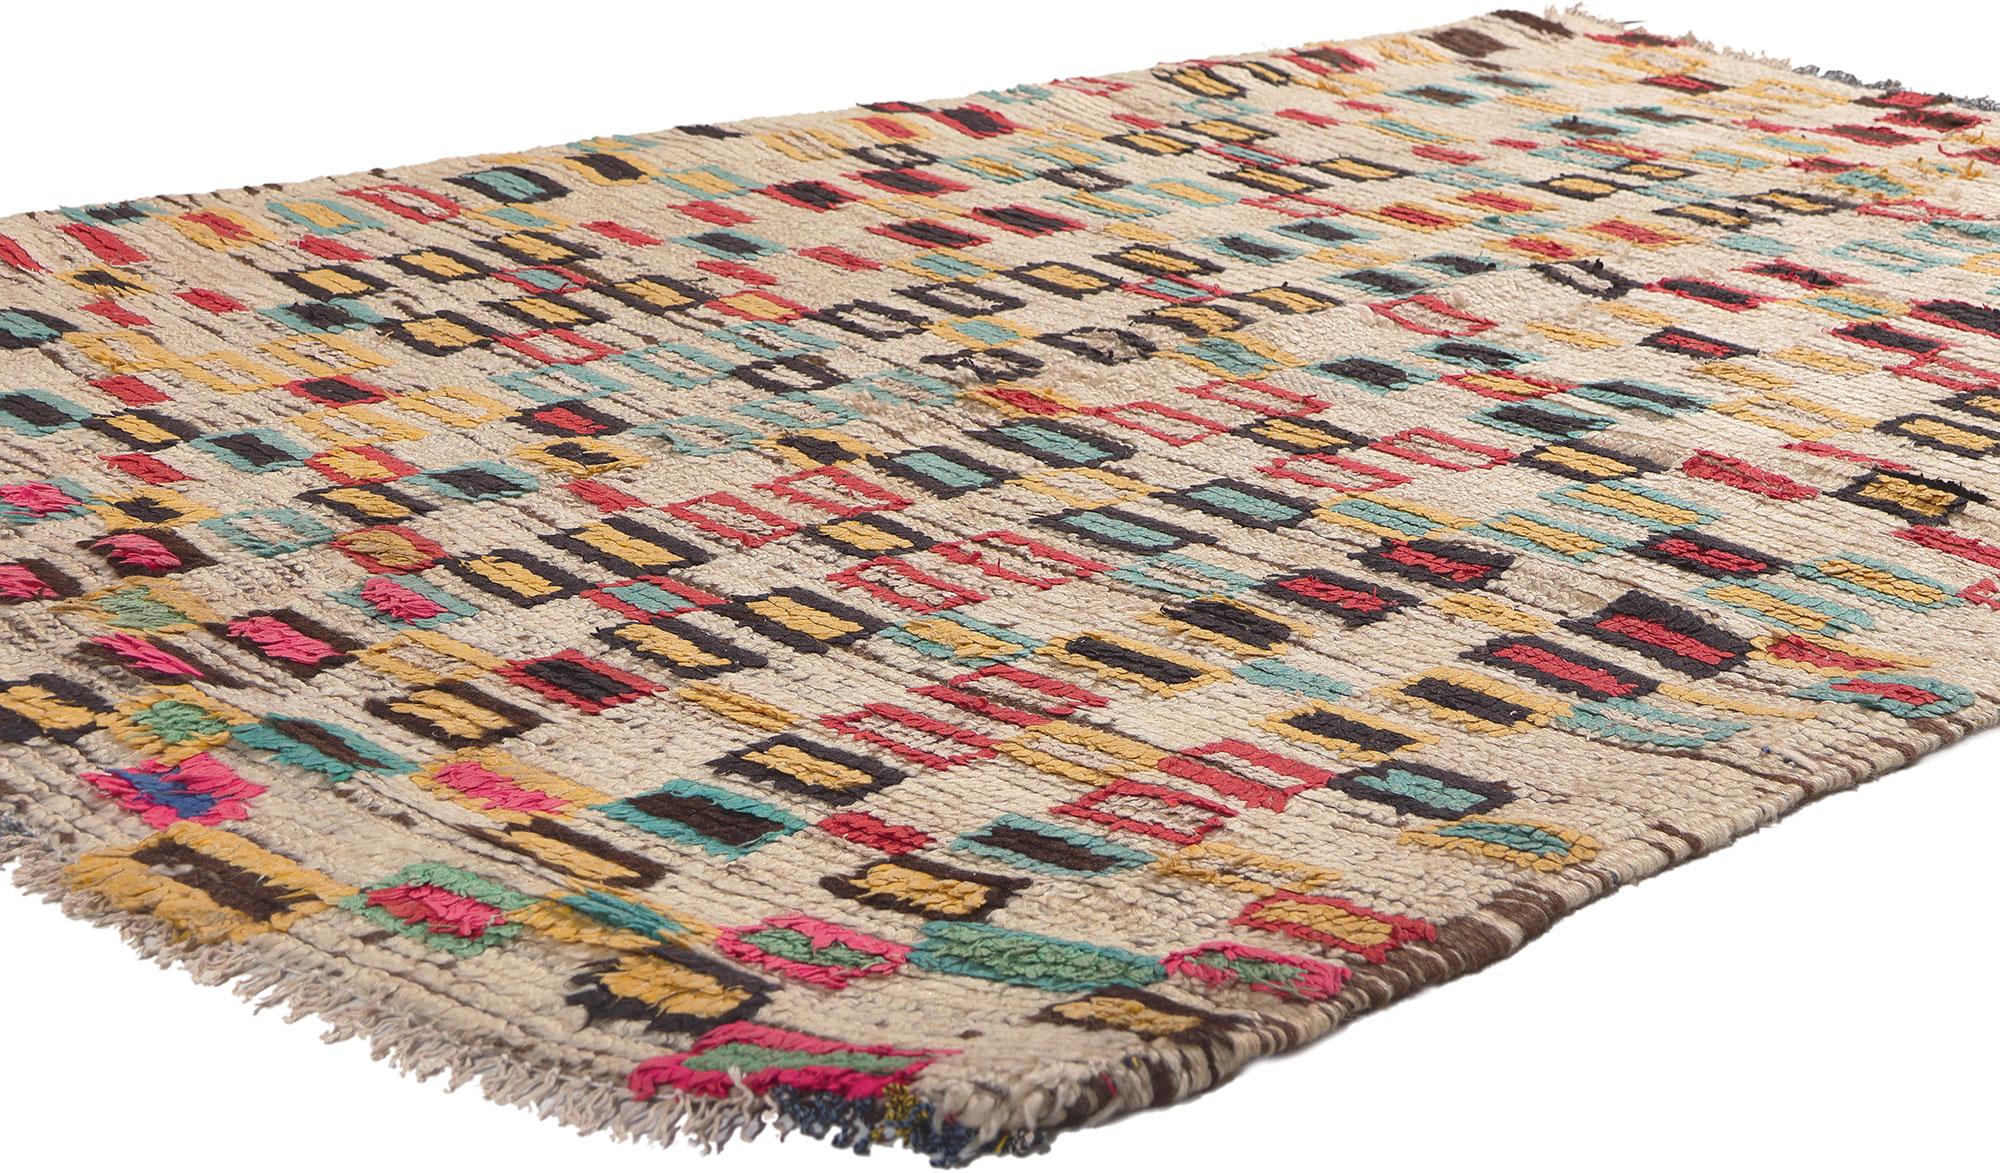 74554 Vintage Berber Moroccan Azilal Rug, 04'06 x 06'02. Hailing from the provincial capital of central Morocco in the High Atlas Mountains, Azila rugs are a type of Berber rug renowned for their geometric patterns and kaleidoscope of colors. Step